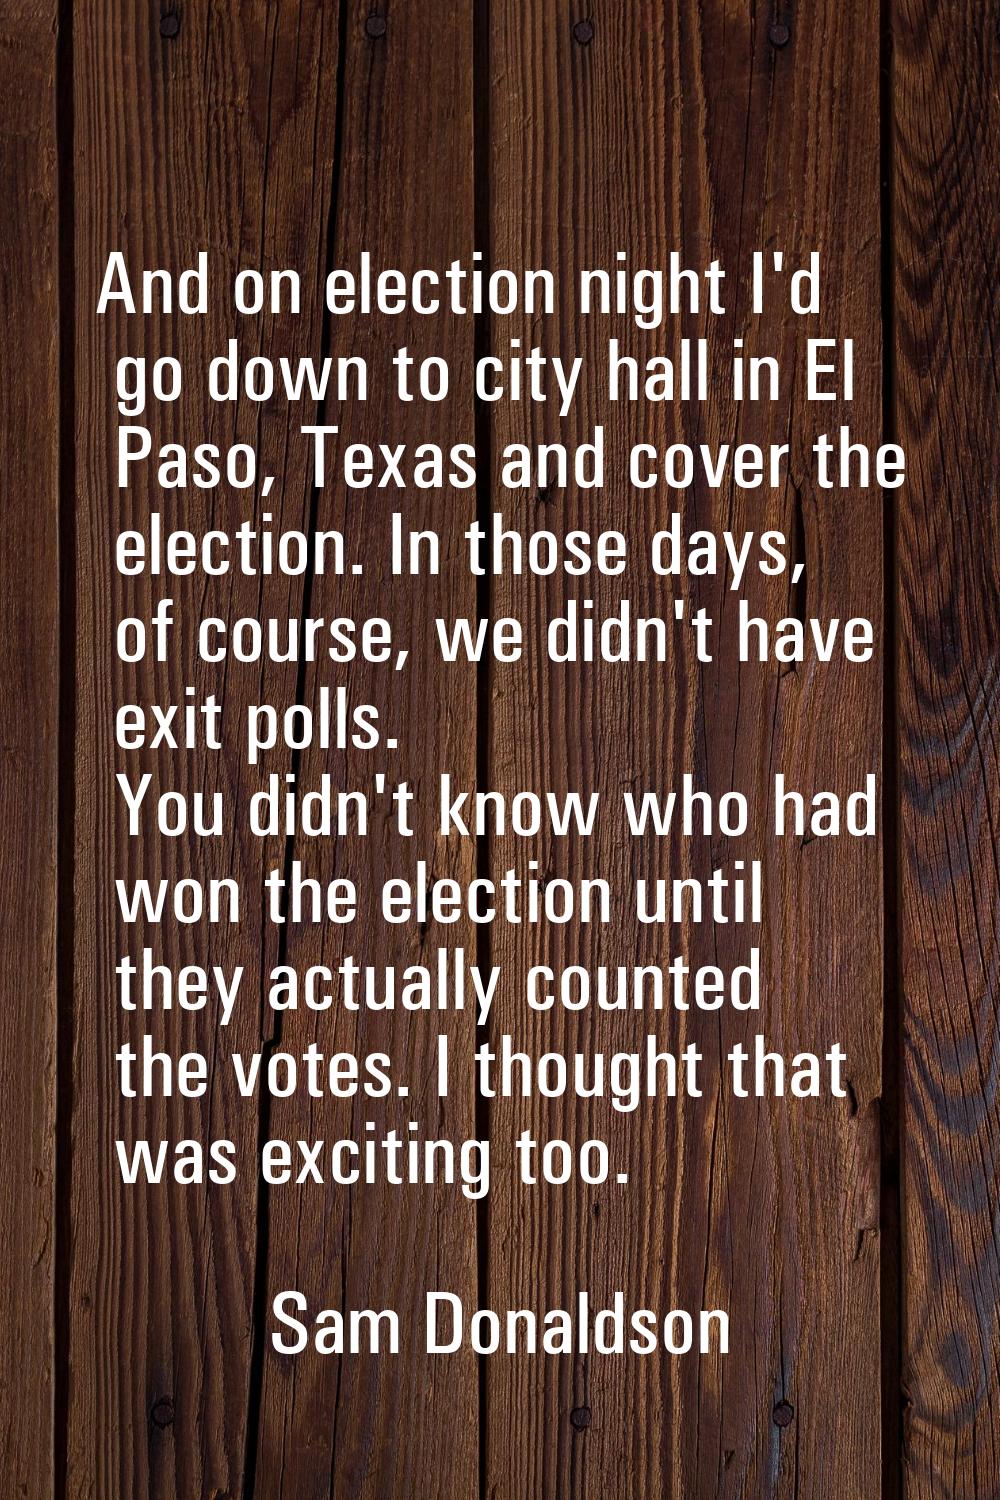 And on election night I'd go down to city hall in El Paso, Texas and cover the election. In those d